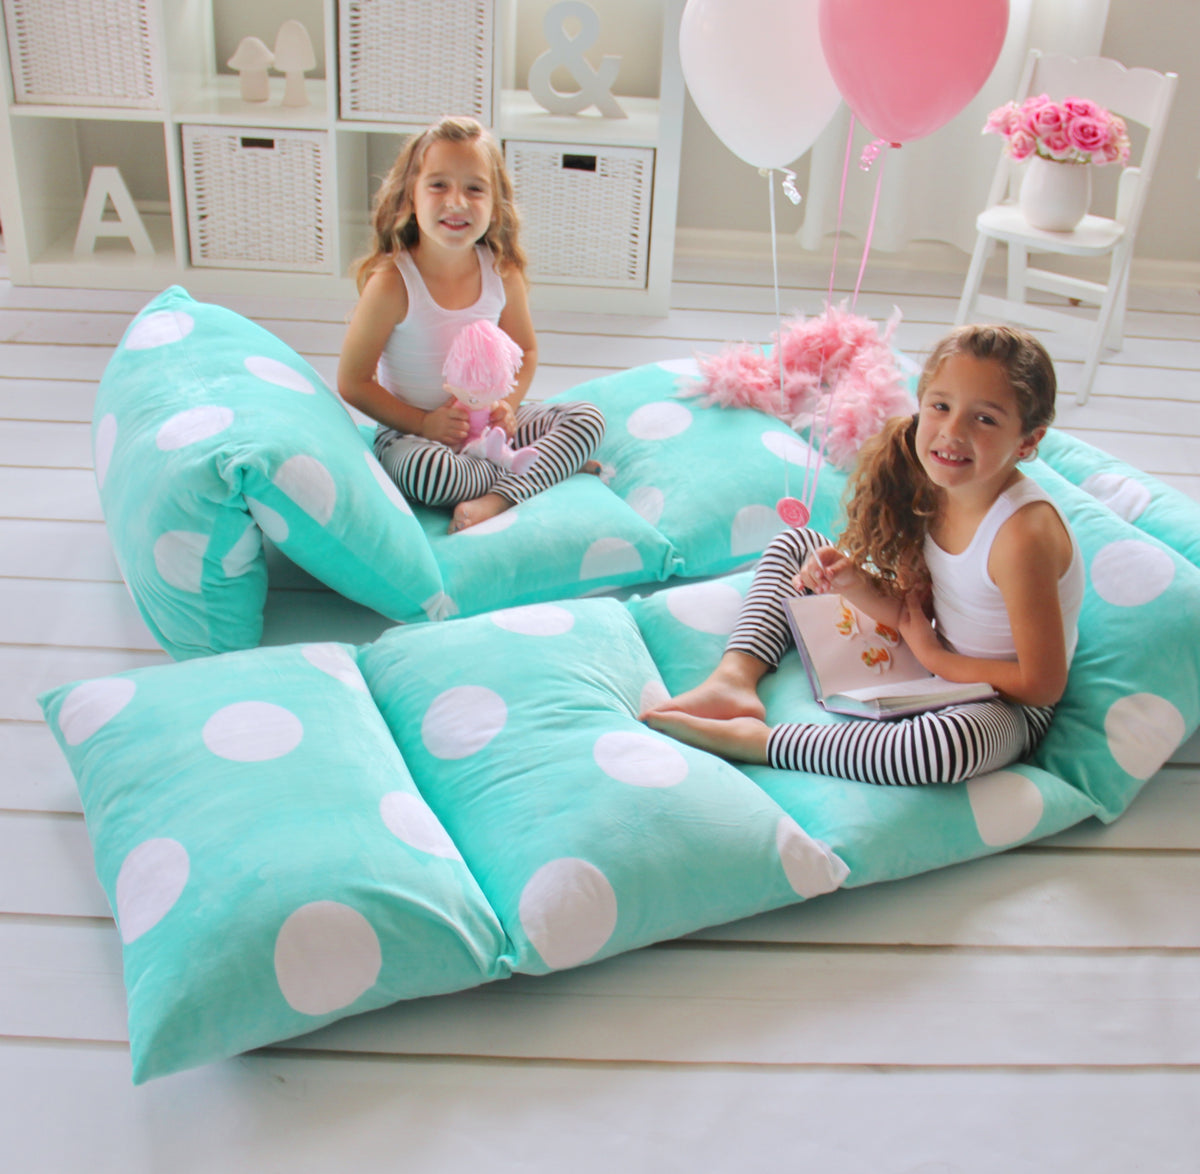 Butterfly Craze Pillow Bed Floor Lounger Cover – grabease by elli&nooli